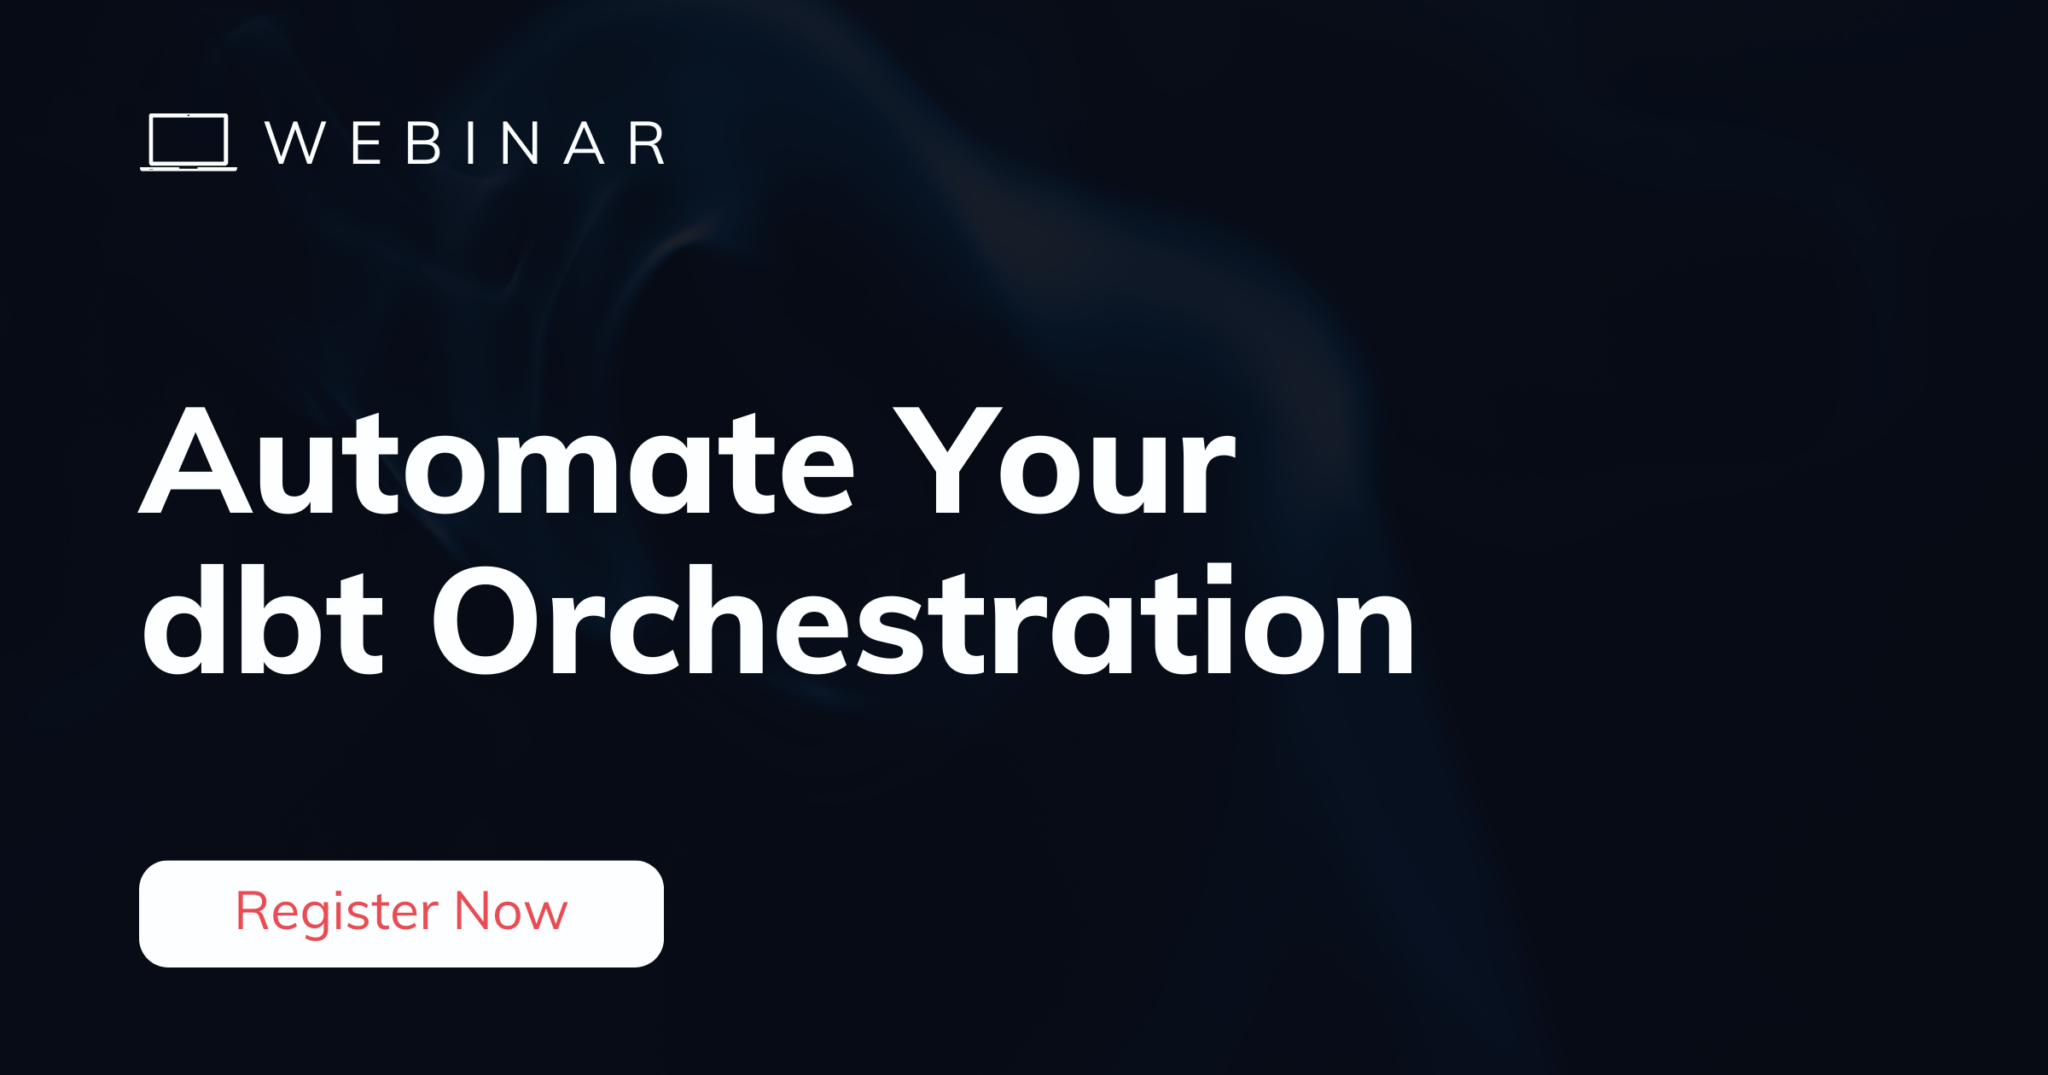 Automate Your dbt Orchestration